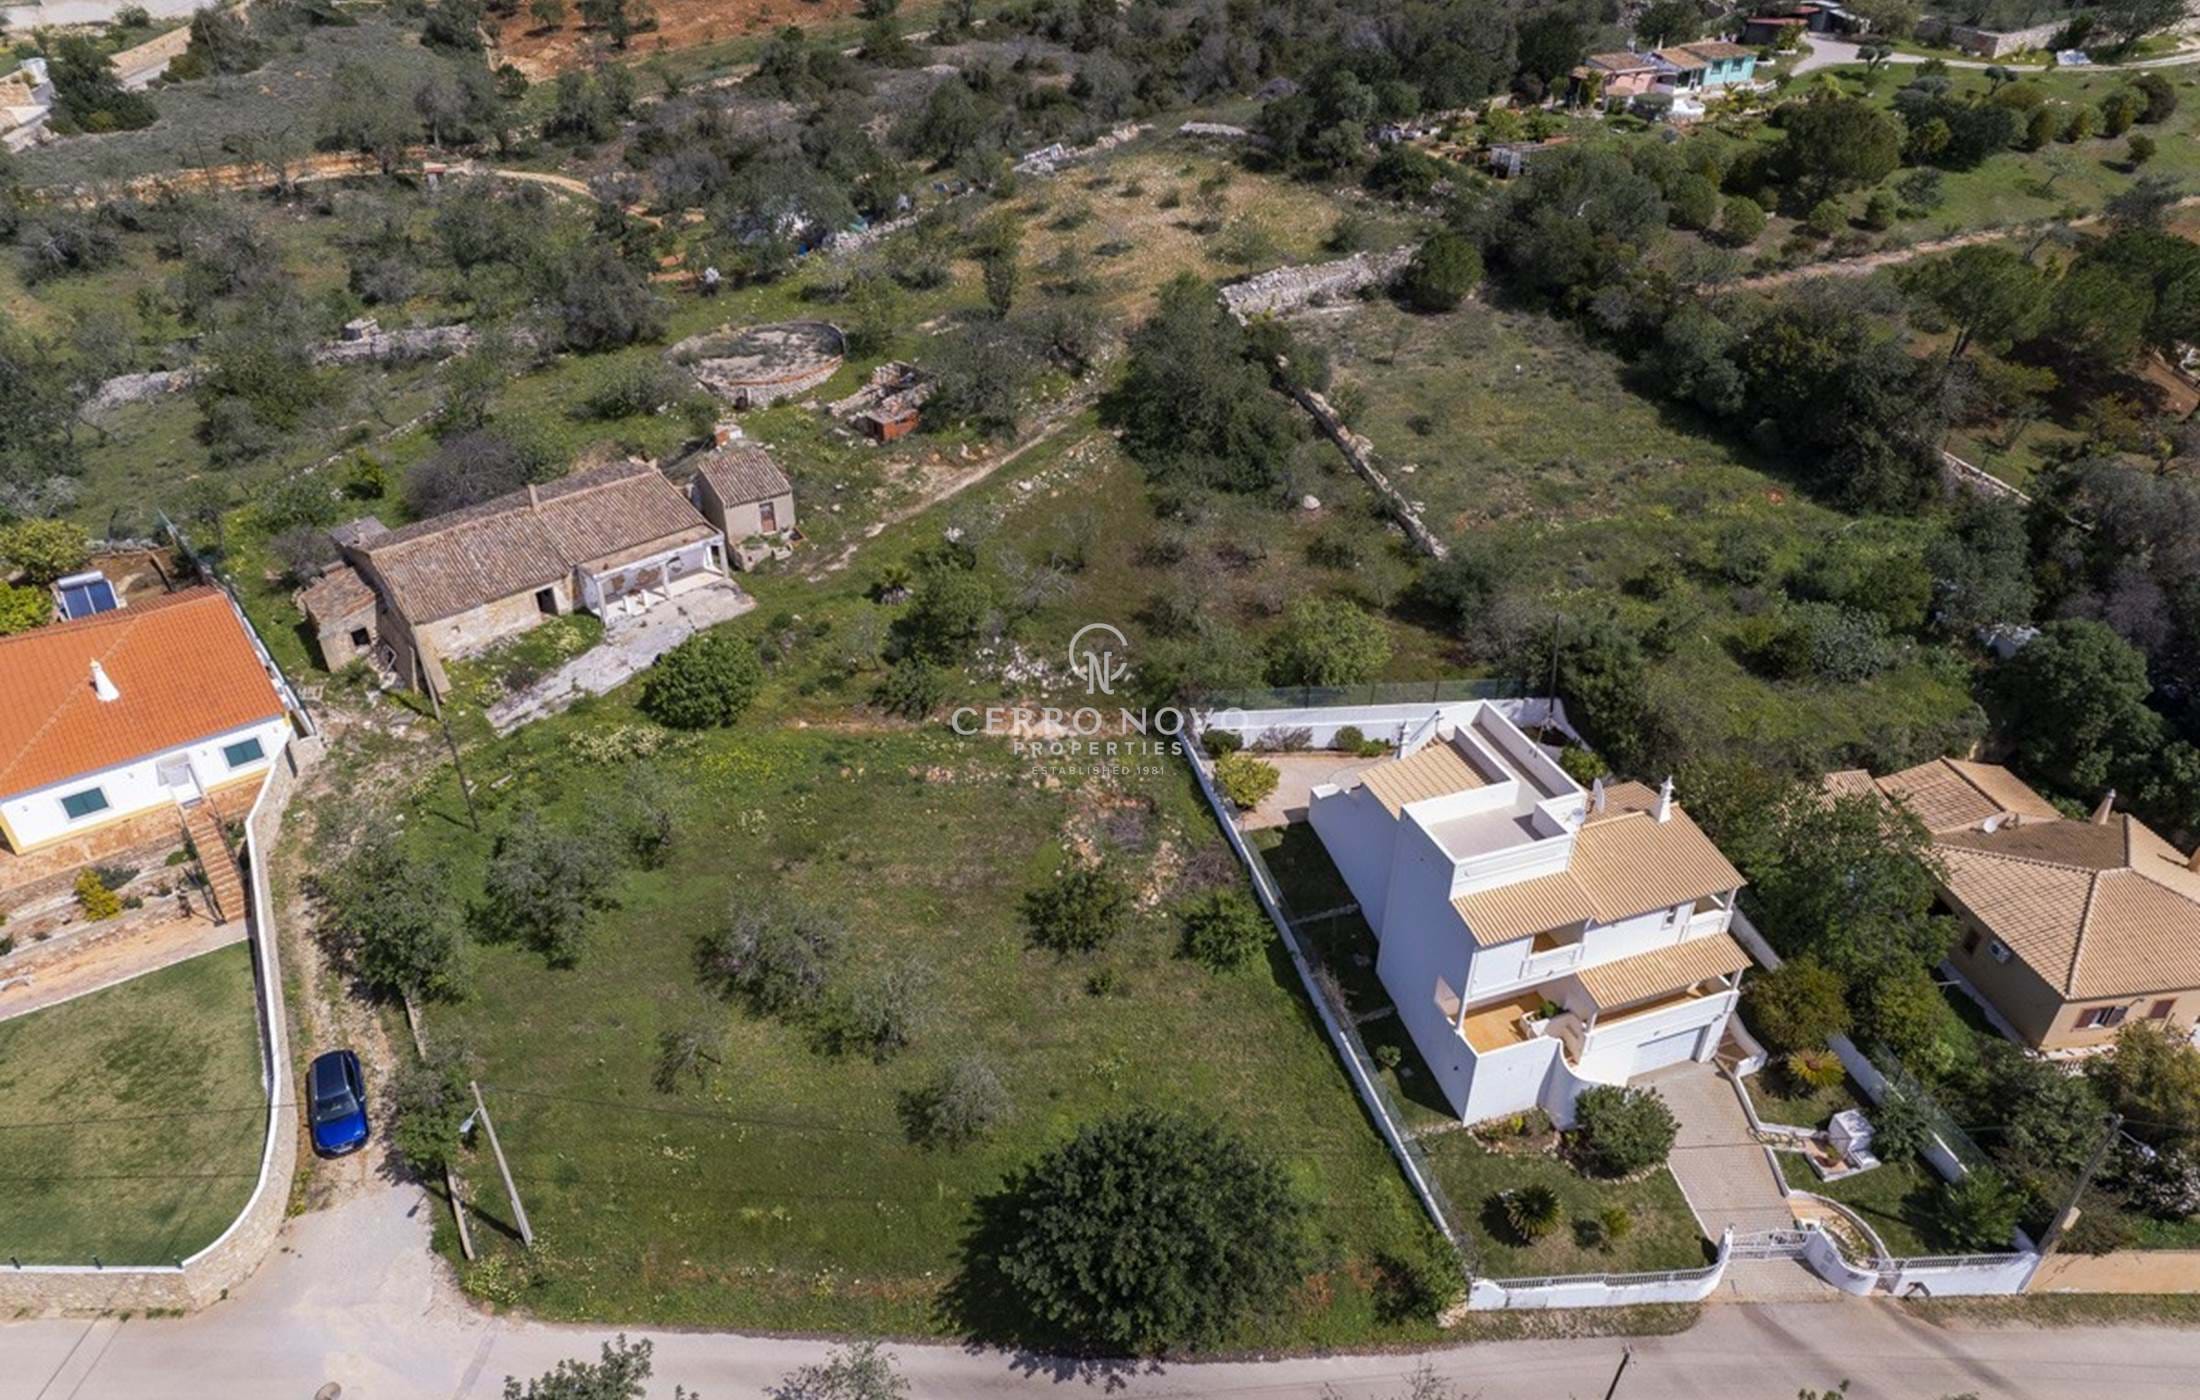 An excellent plot with permission to build a villa with pool